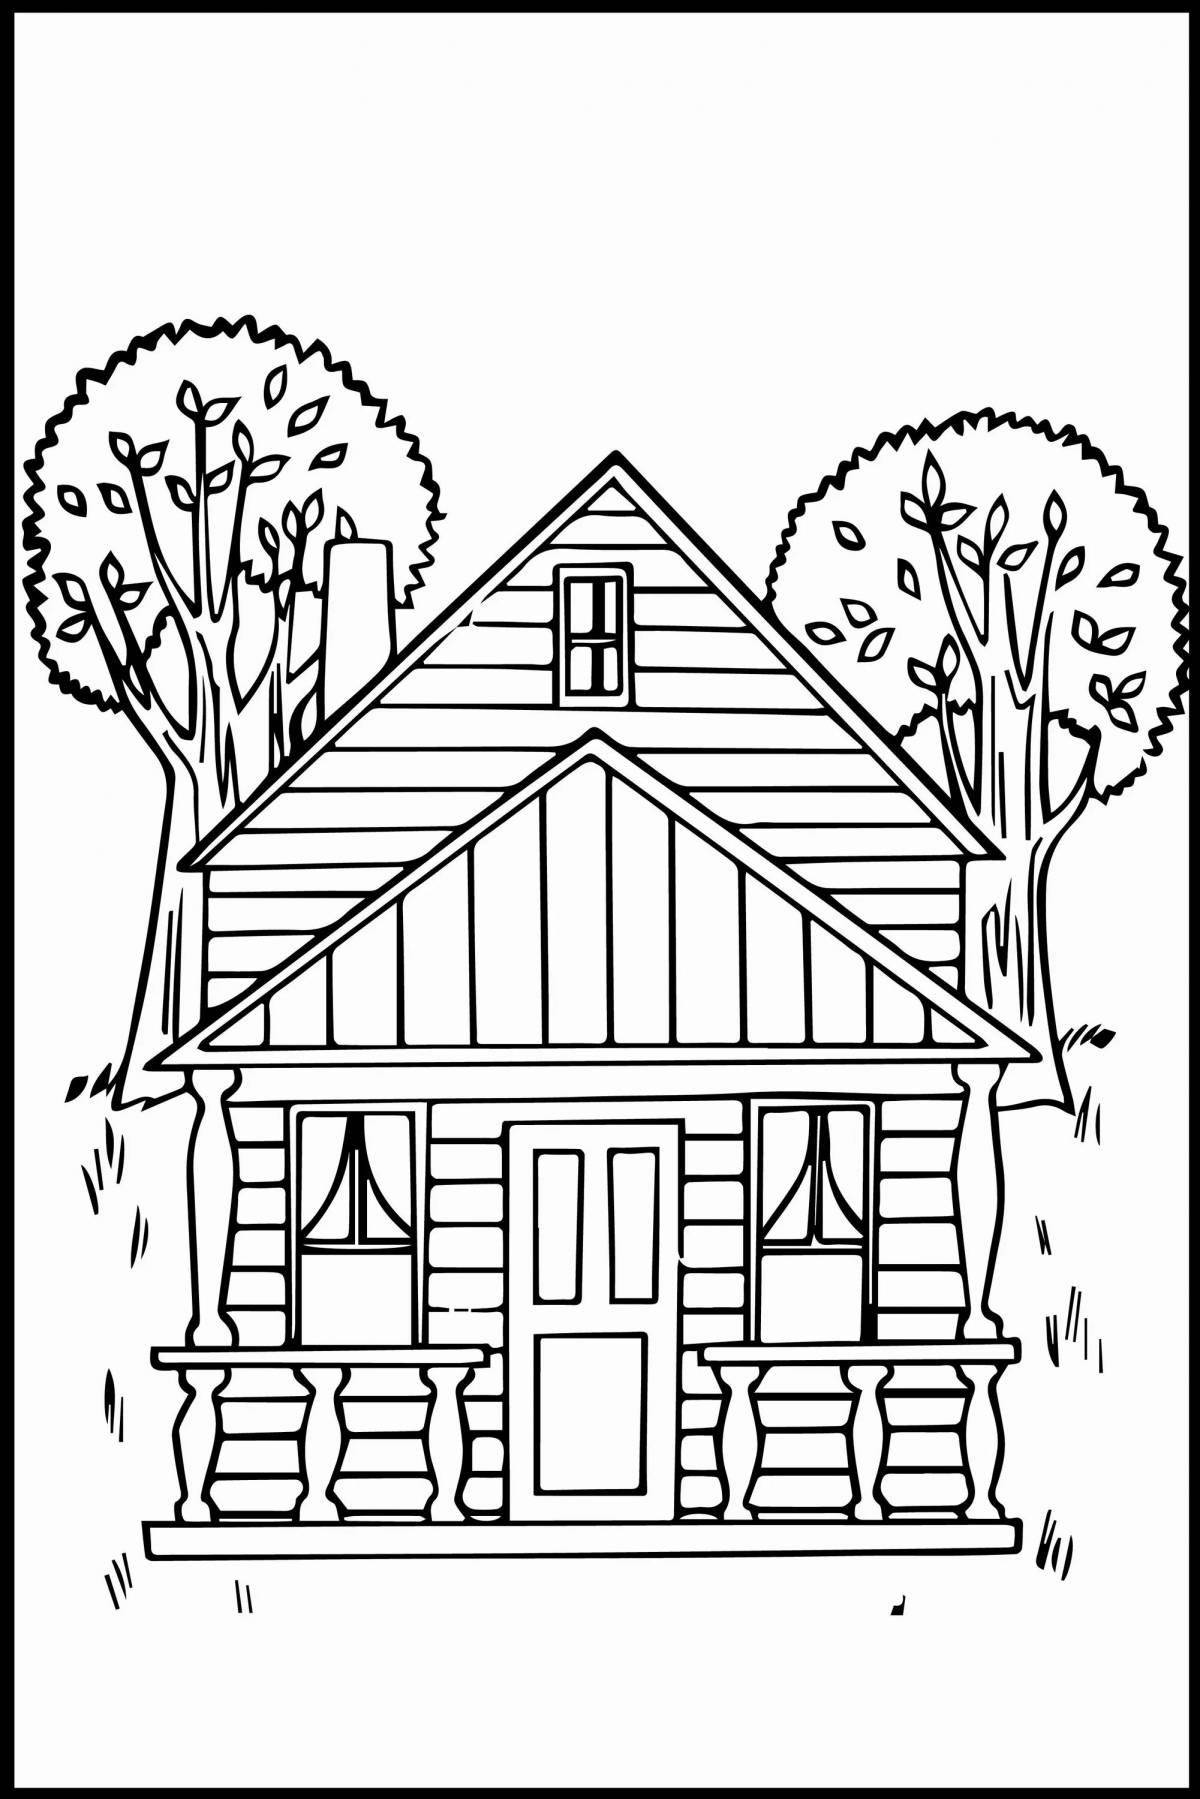 Coloring page gorgeous house